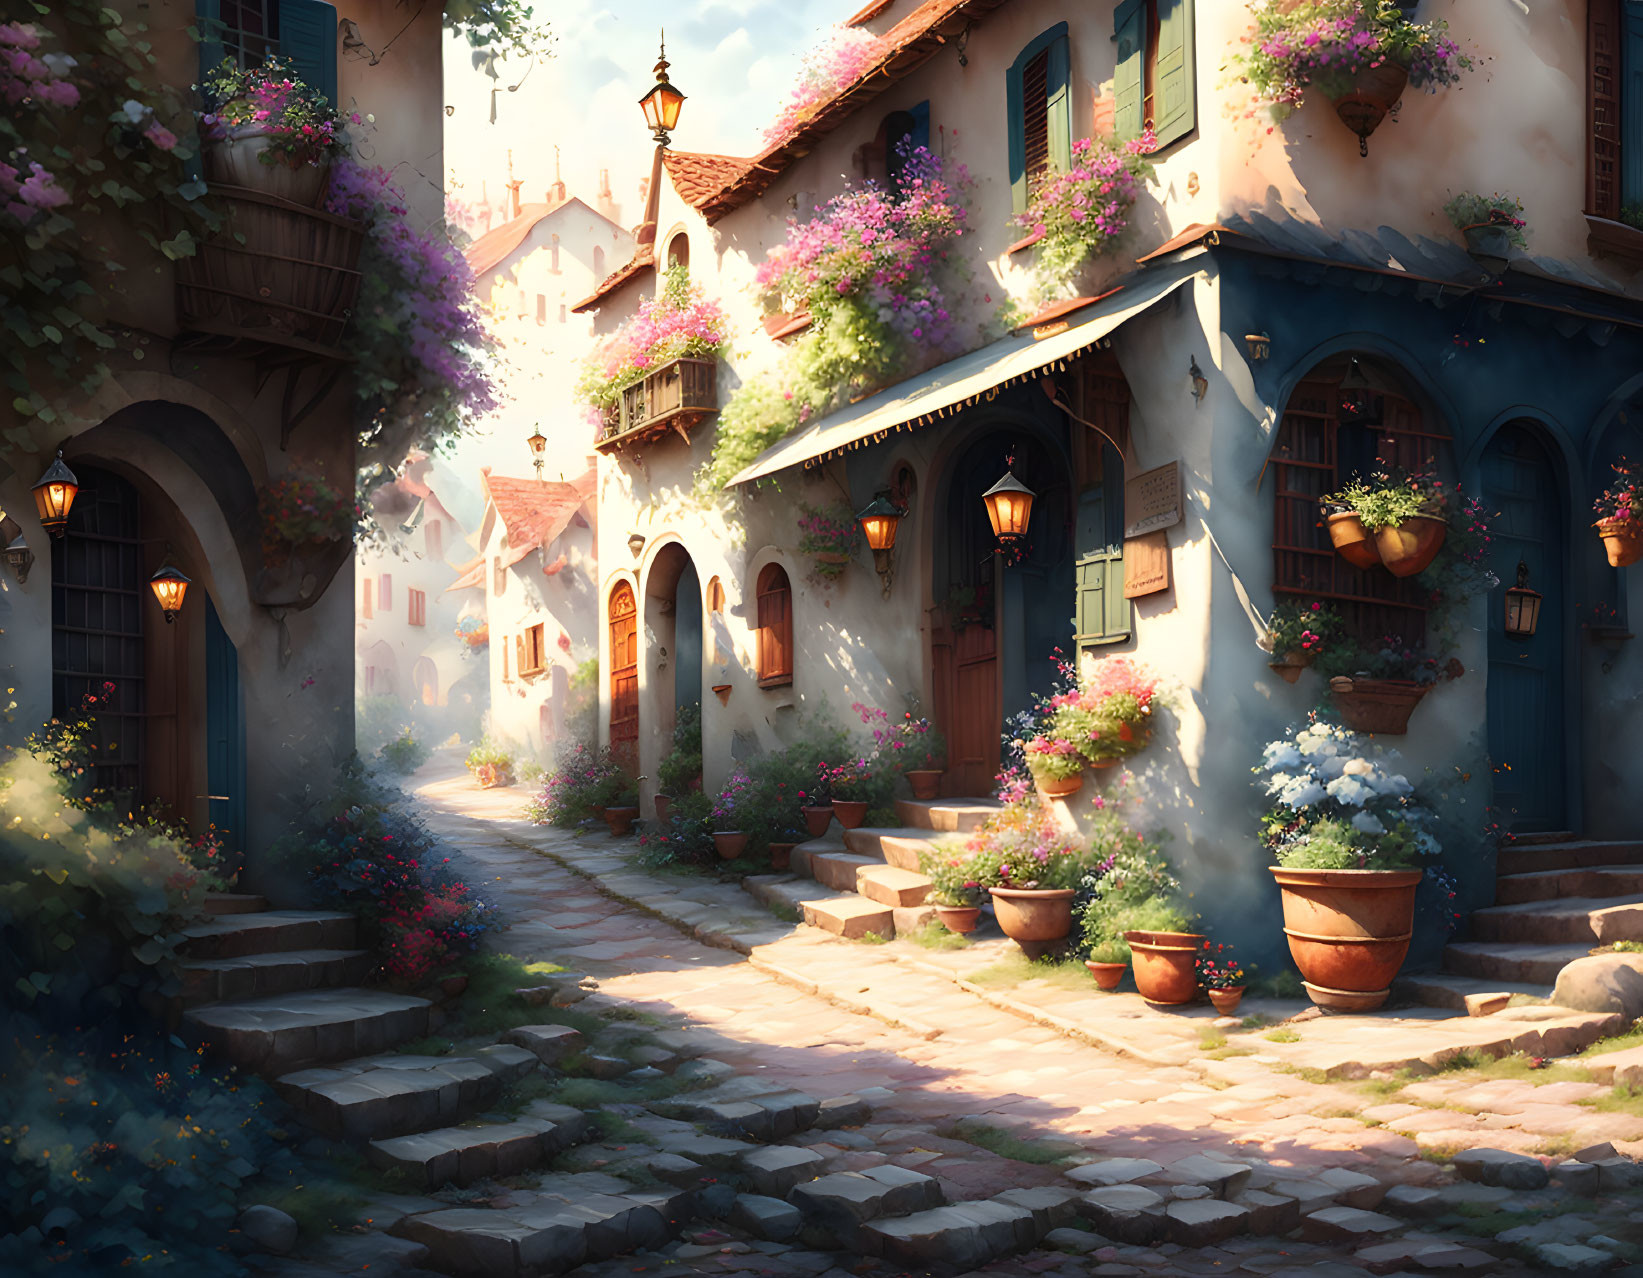 Picturesque cobblestone street with charming houses and blooming flora in sunlight